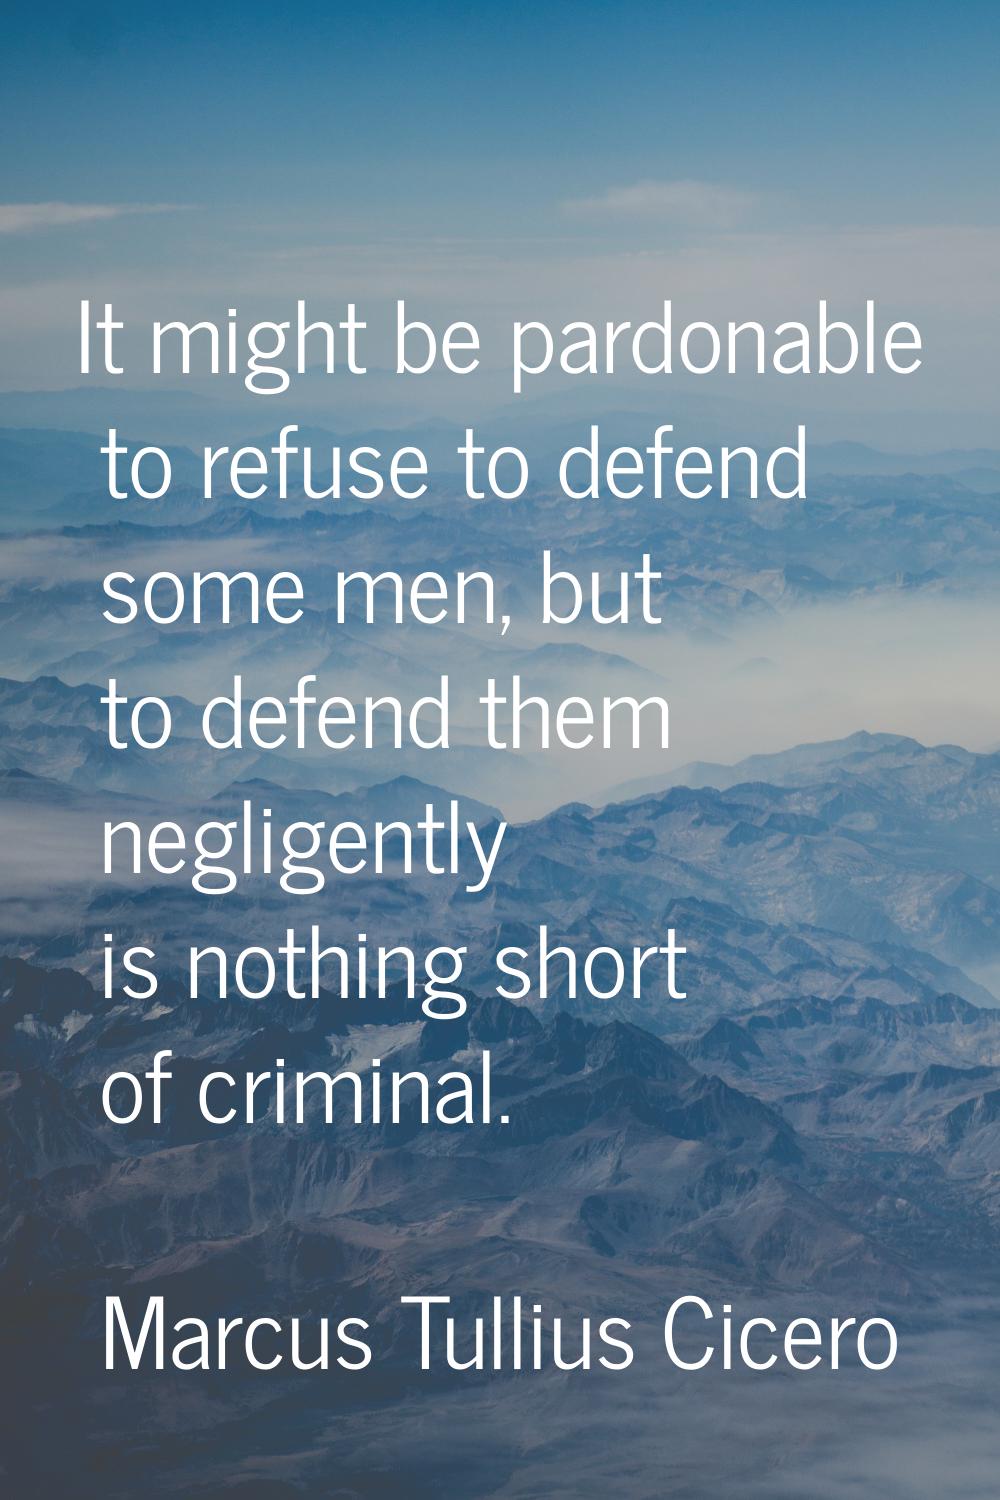 It might be pardonable to refuse to defend some men, but to defend them negligently is nothing shor